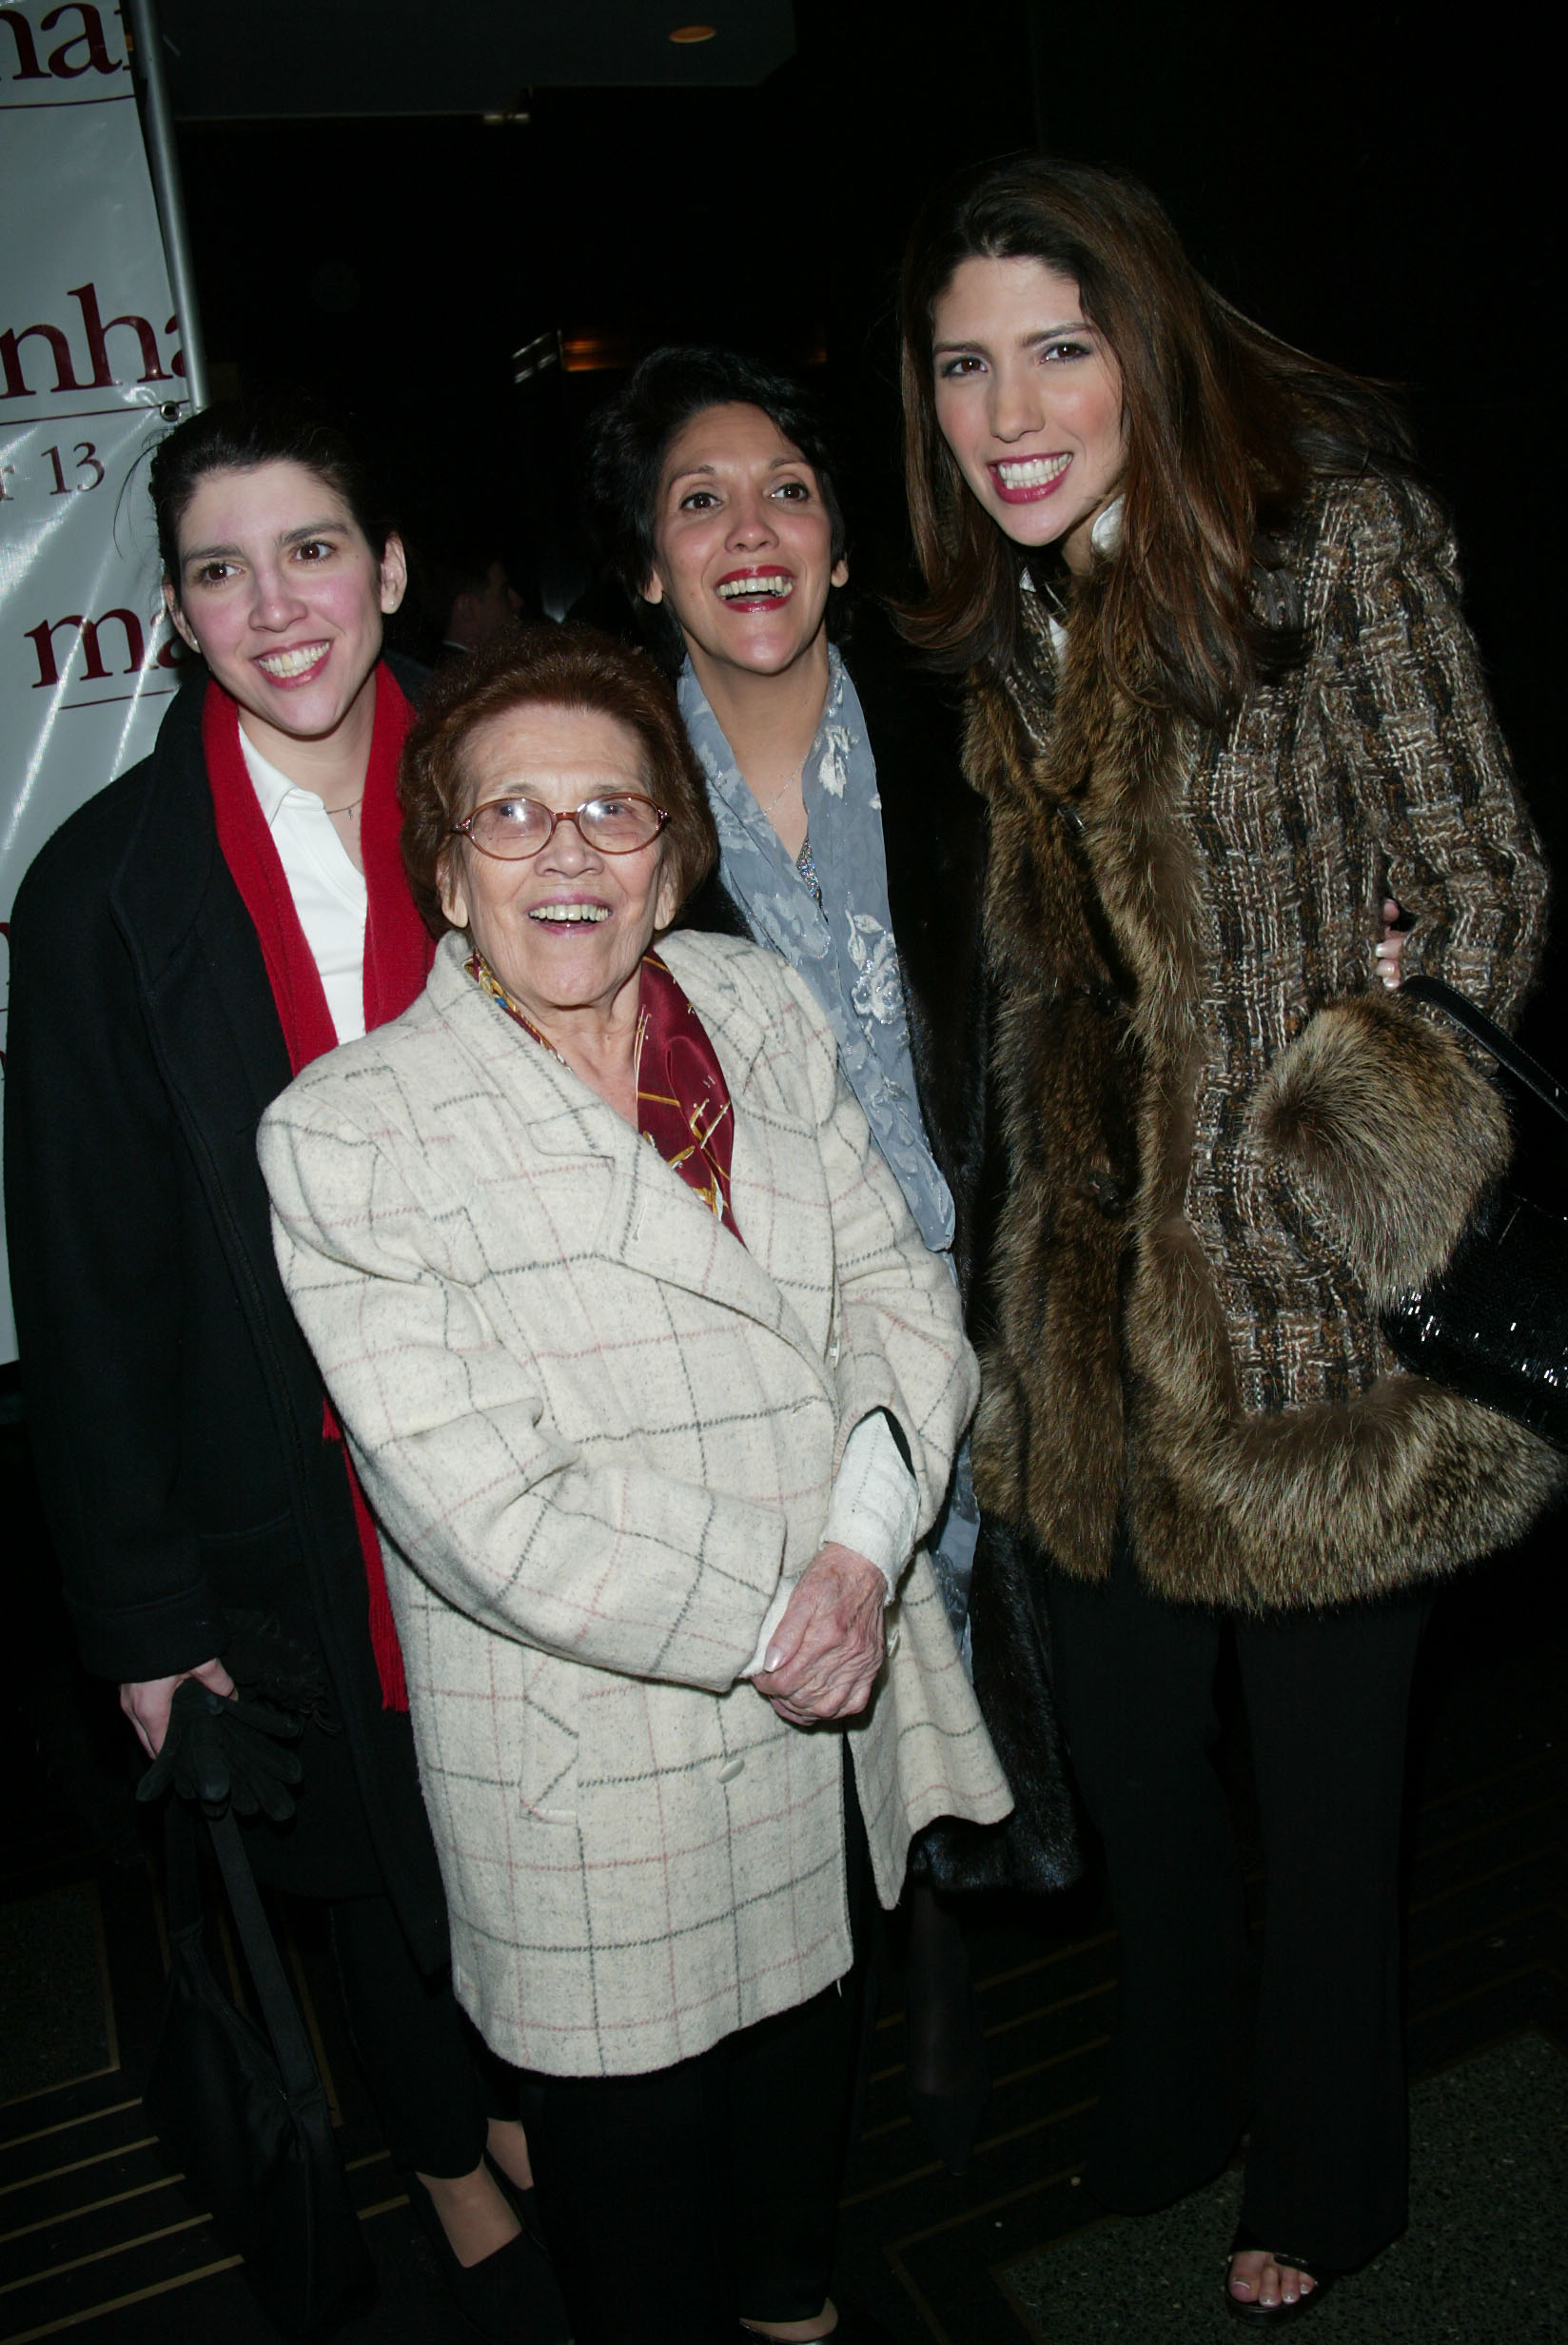 Leslie Lopez, Guadalupe Rodriguez, Lynda Lopez, and grandmother at the "Maid In Manhattan" world premiere after-party, December 2002 | Source: Getty Images